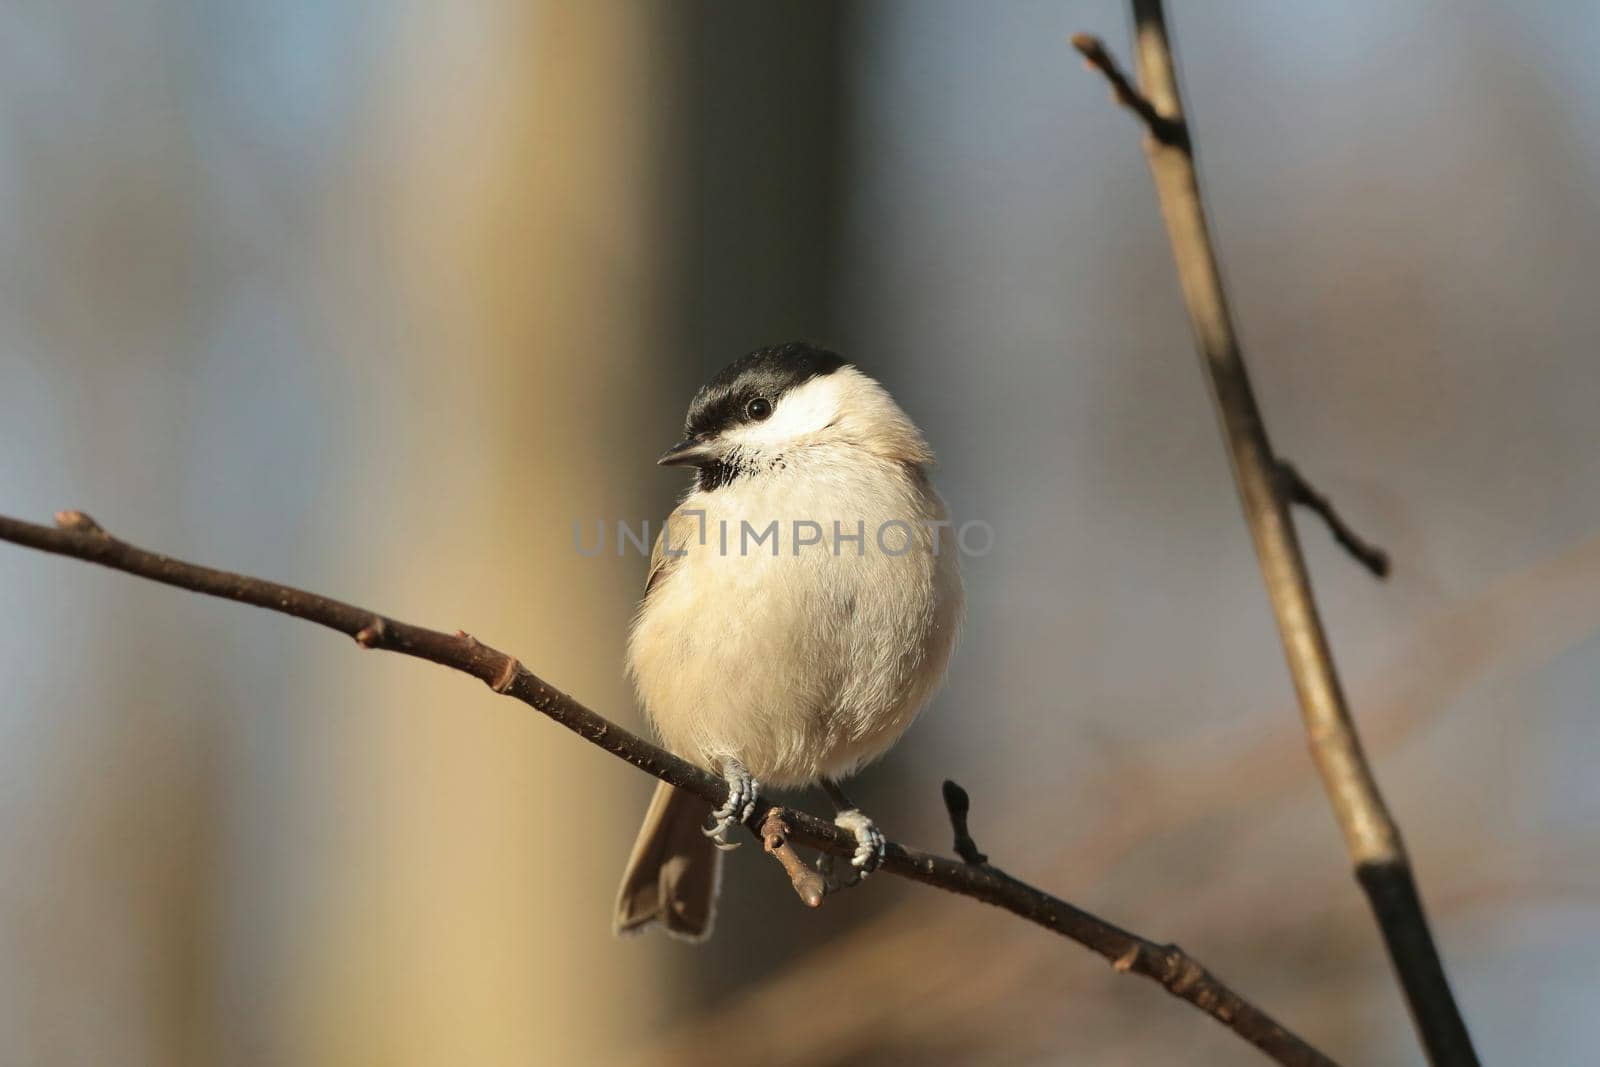 Marsh tit by nature78